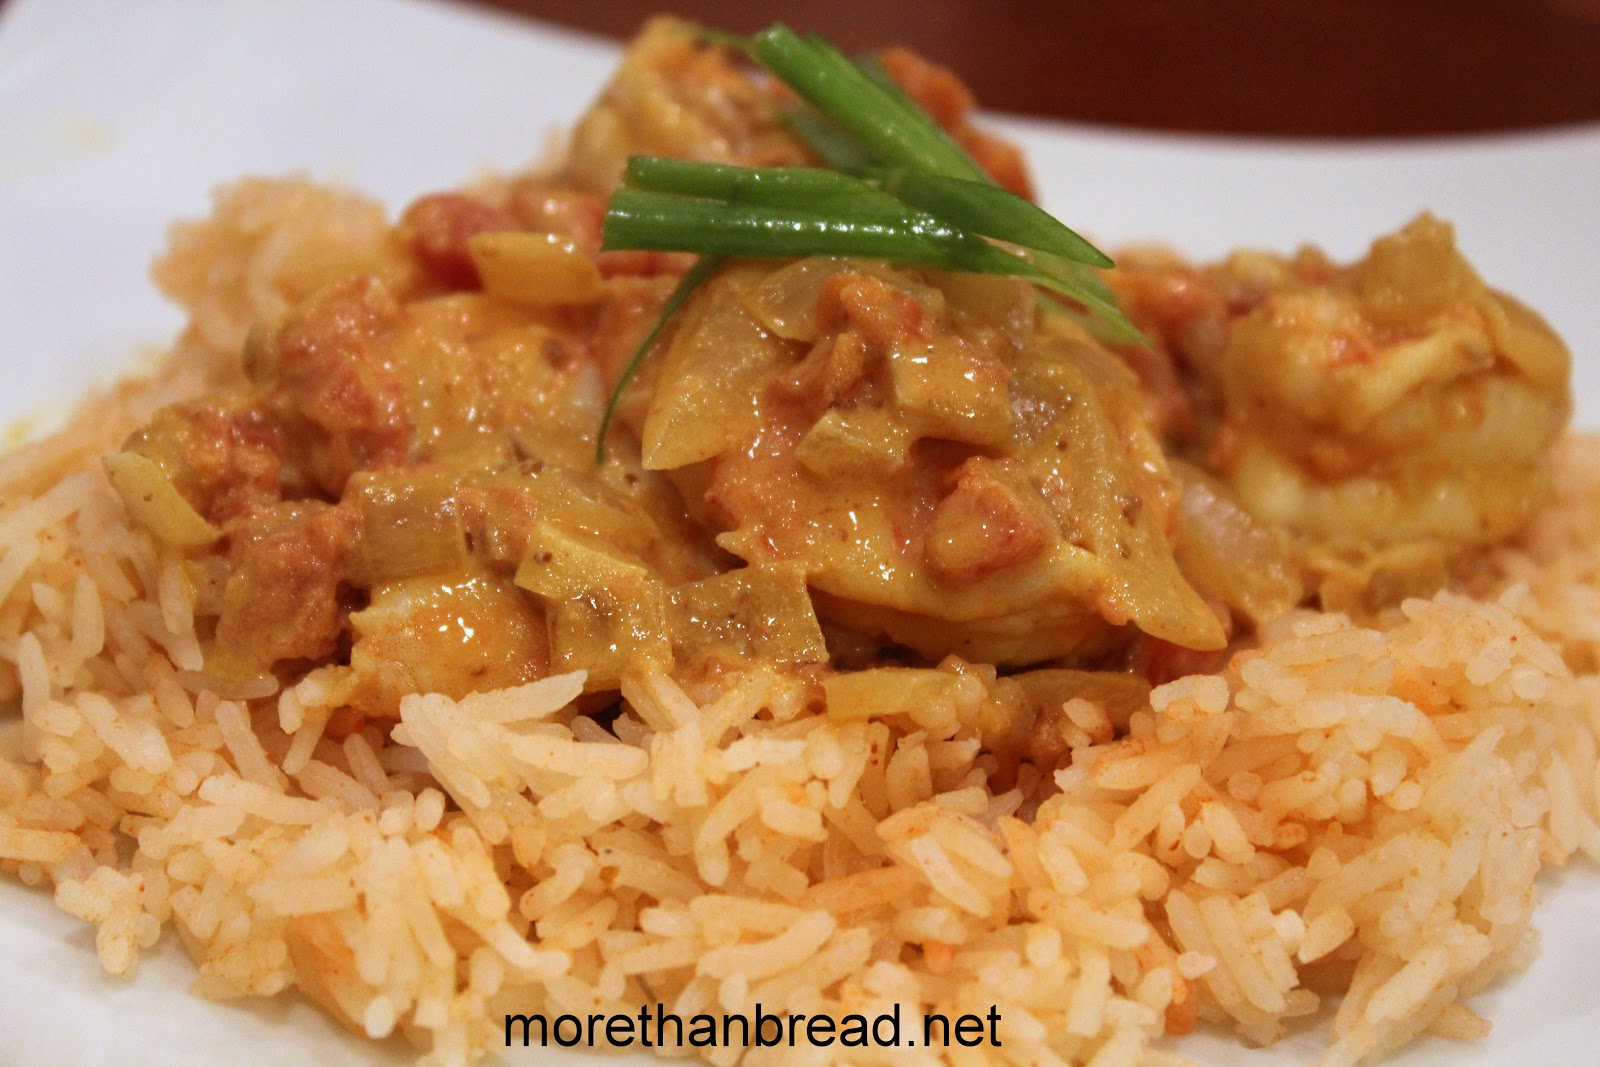 More Than Bread: Portuguese Curried Shrimp with Rice 葡式咖哩蝦飯